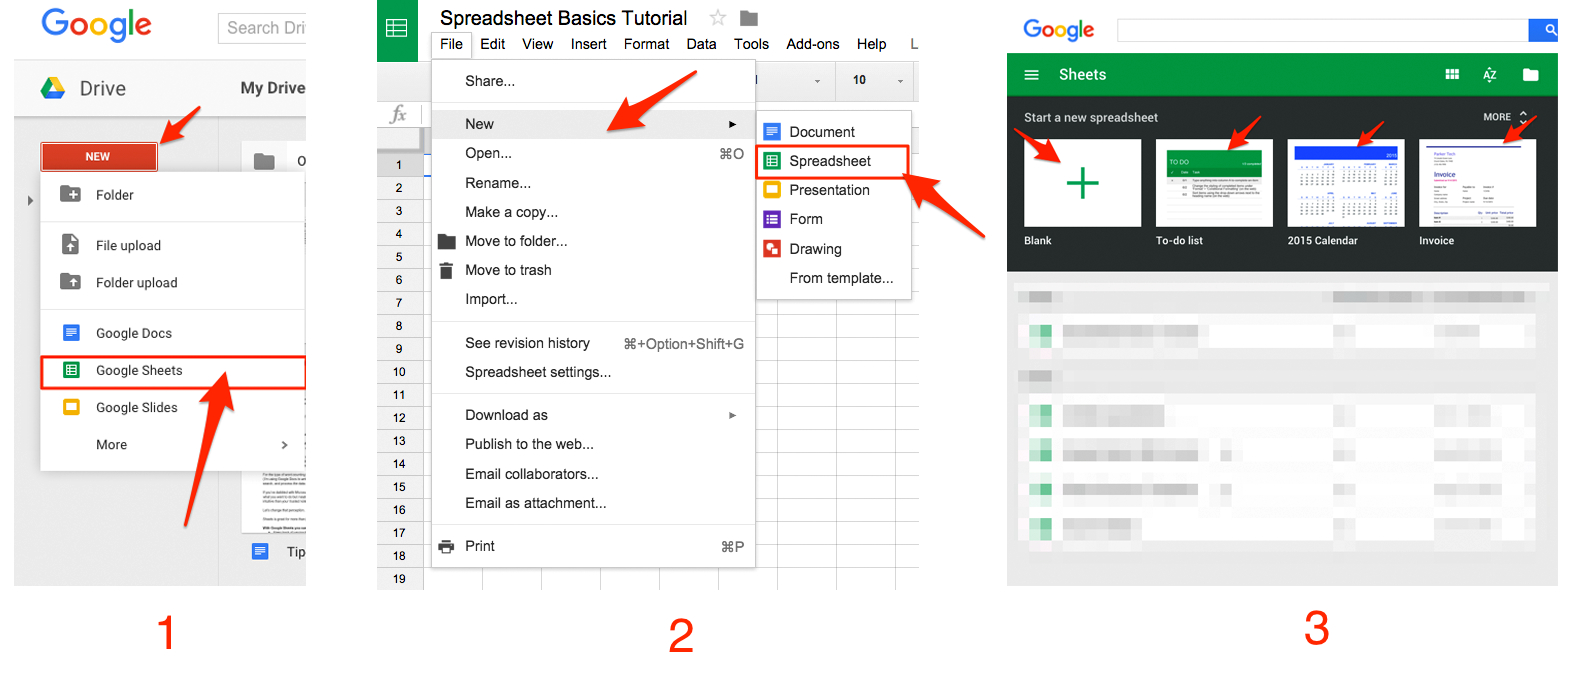 Google Sheets 101: The Beginner's Guide To Online Spreadsheets - The With Create Online Spreadsheet